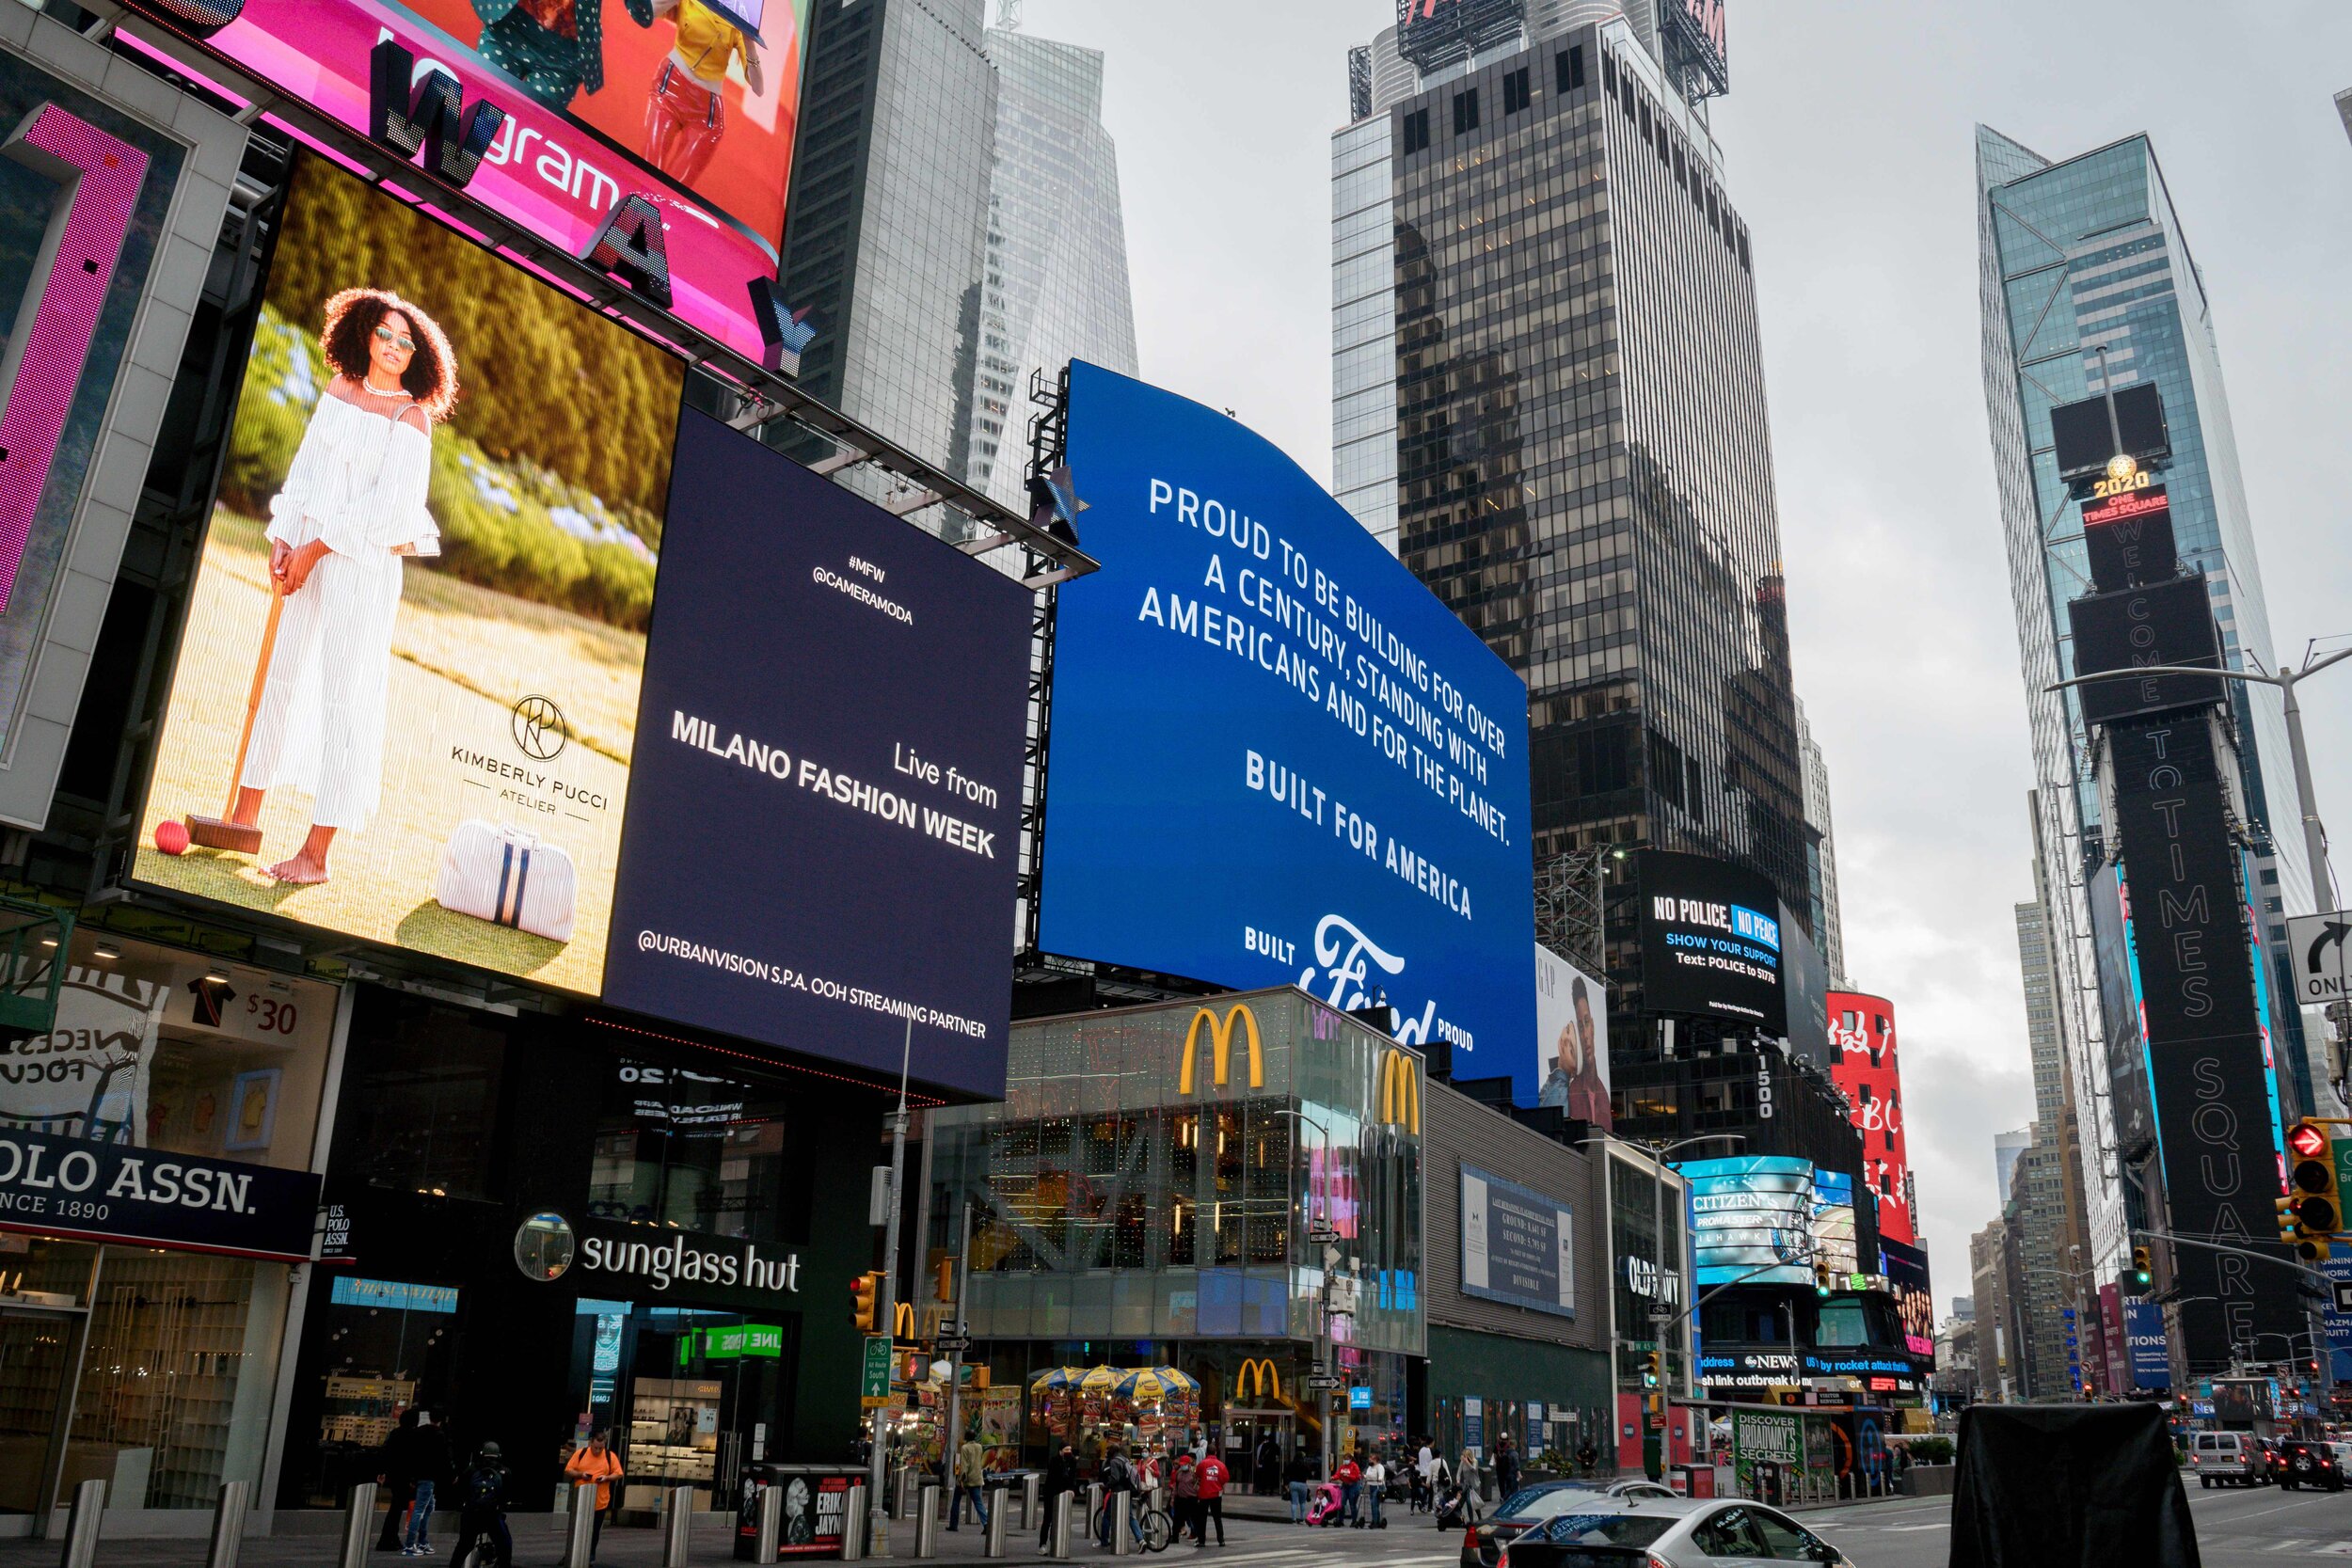 Times-Square-Billboards-2020-Eric-Vitale-Photography-12-lowres.jpg